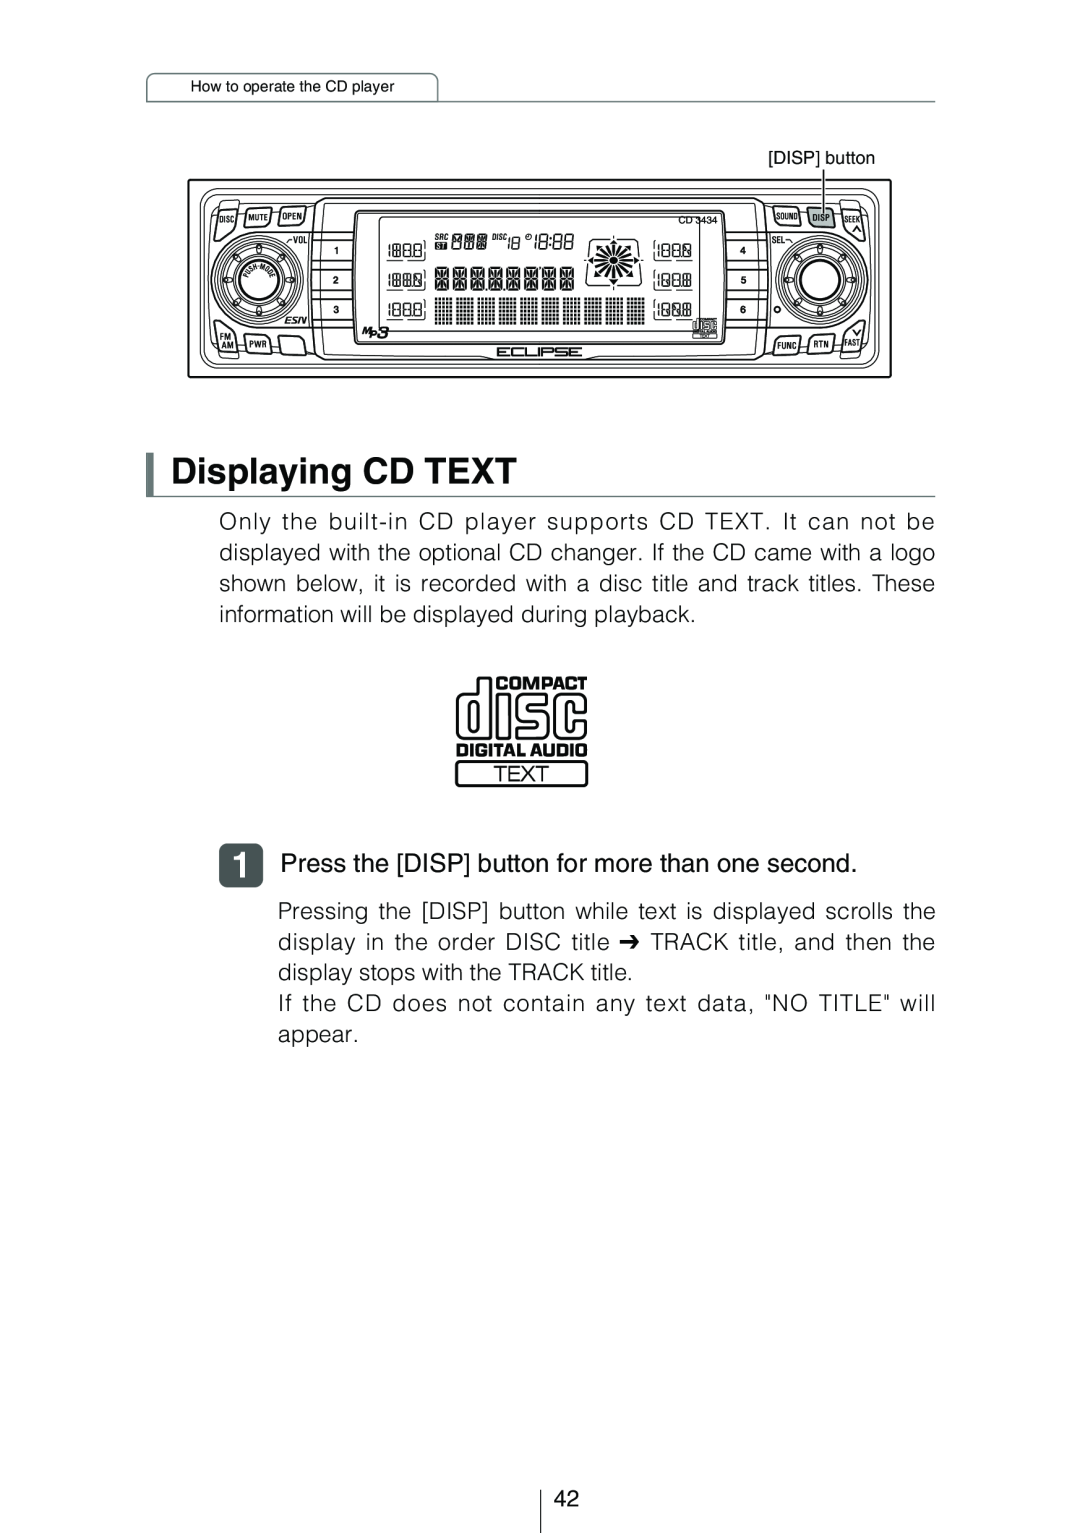 Eclipse - Fujitsu Ten CD3434 owner manual Displaying CD TEXT, Press the DISP button for more than one second 